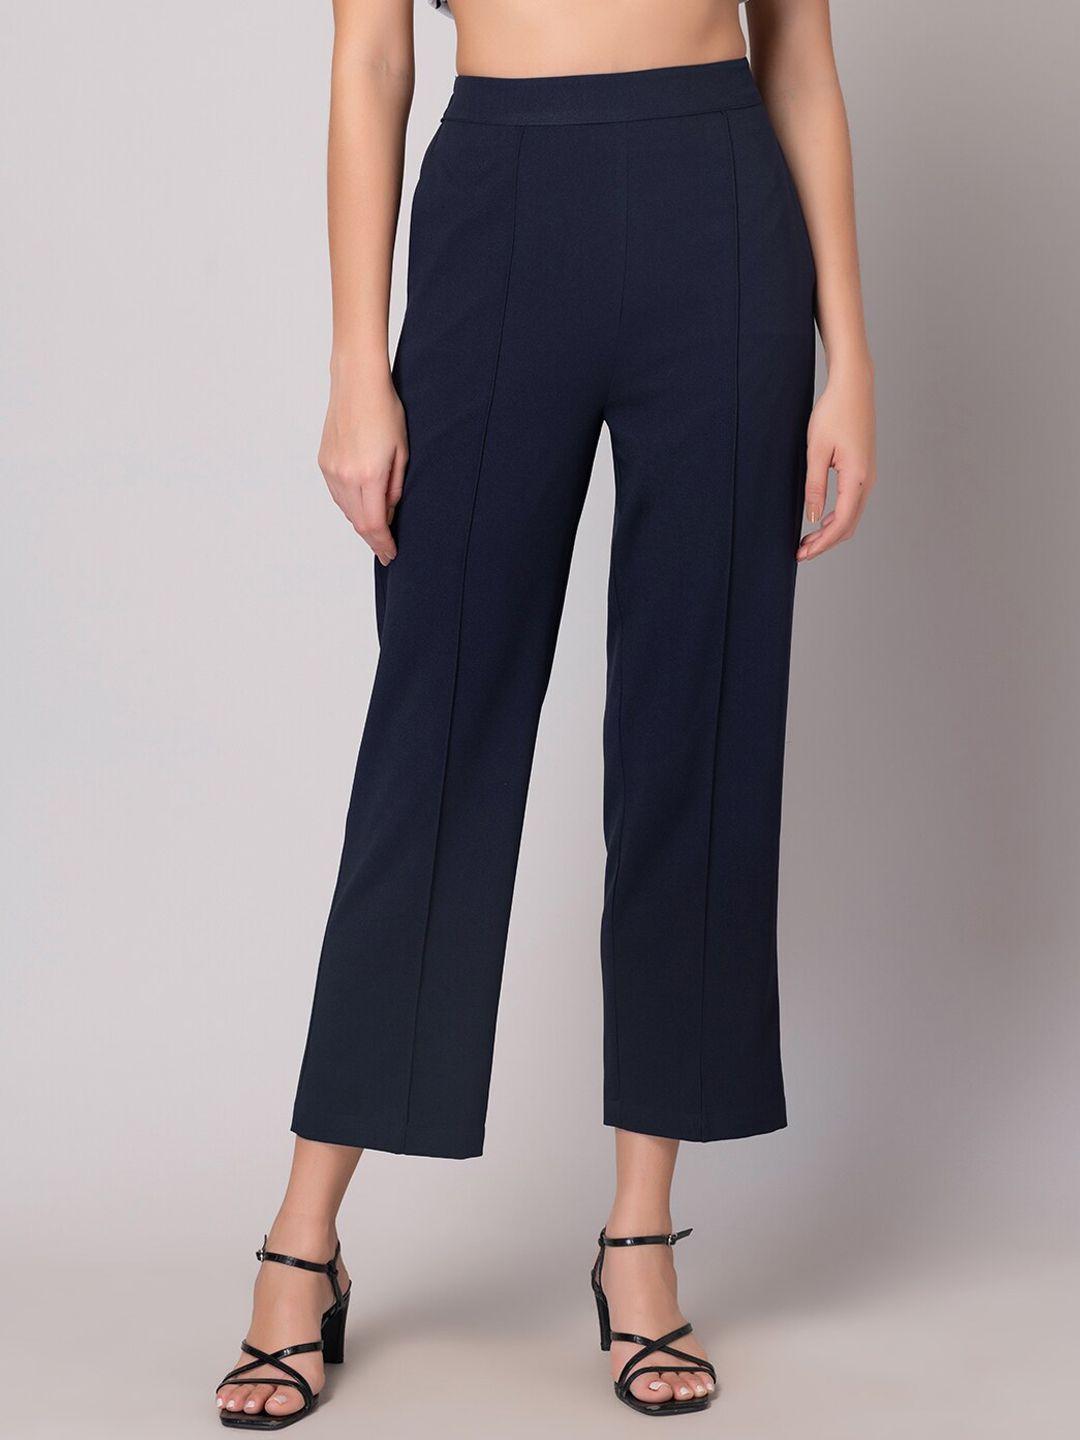 faballey women mid rise straight plain parallel trousers